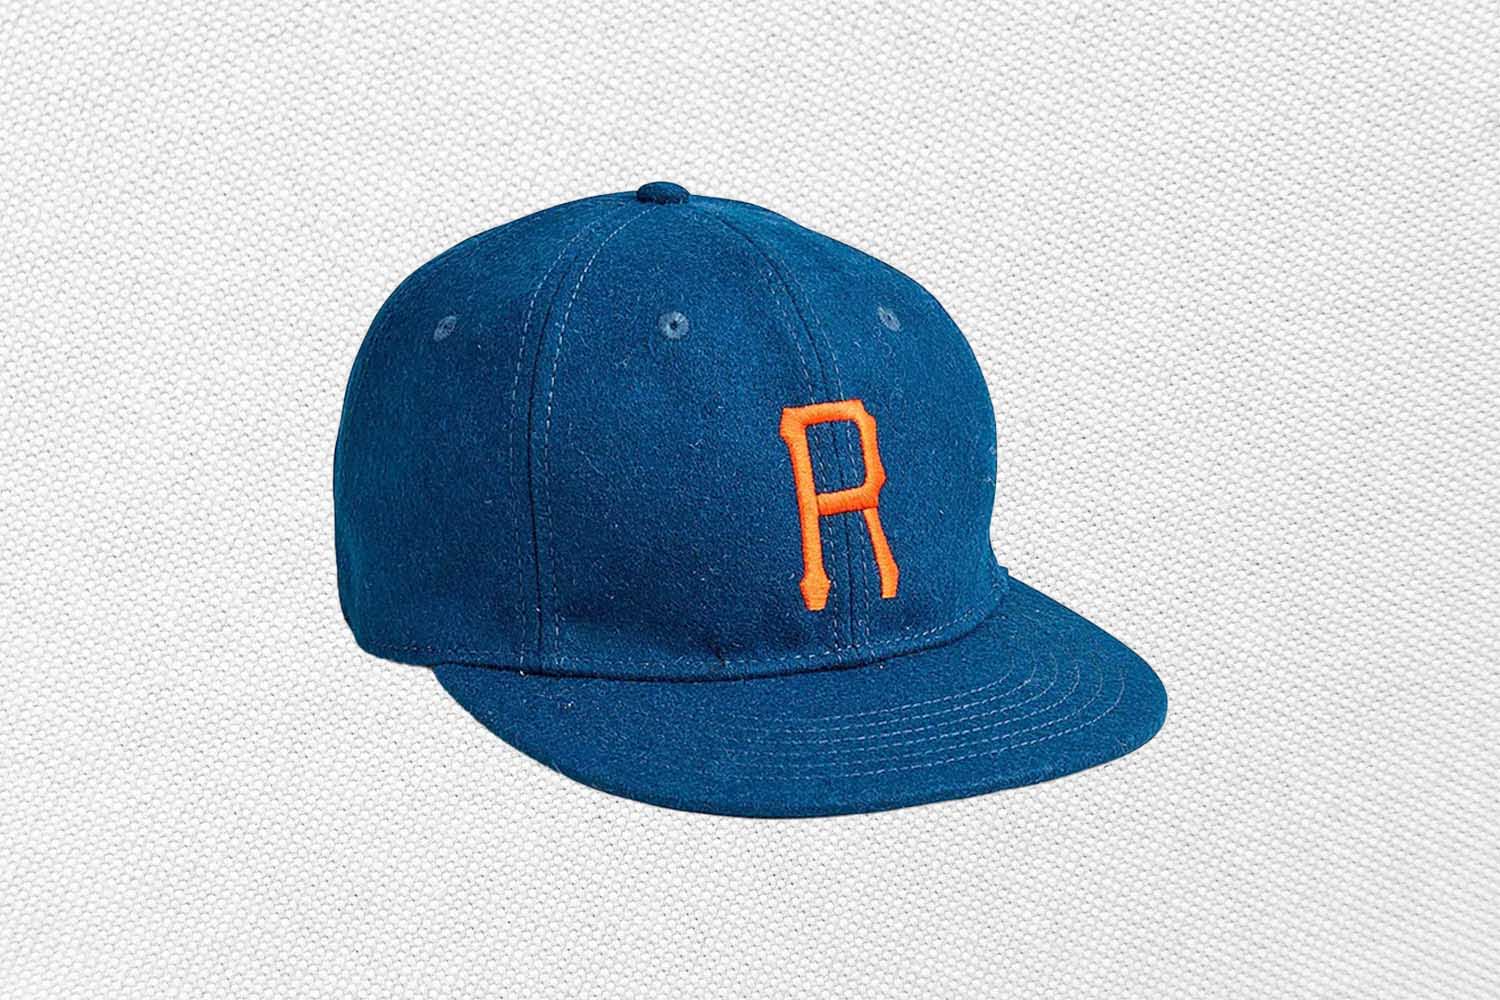 a blue wool baseball cap from J.Crew on a grey background